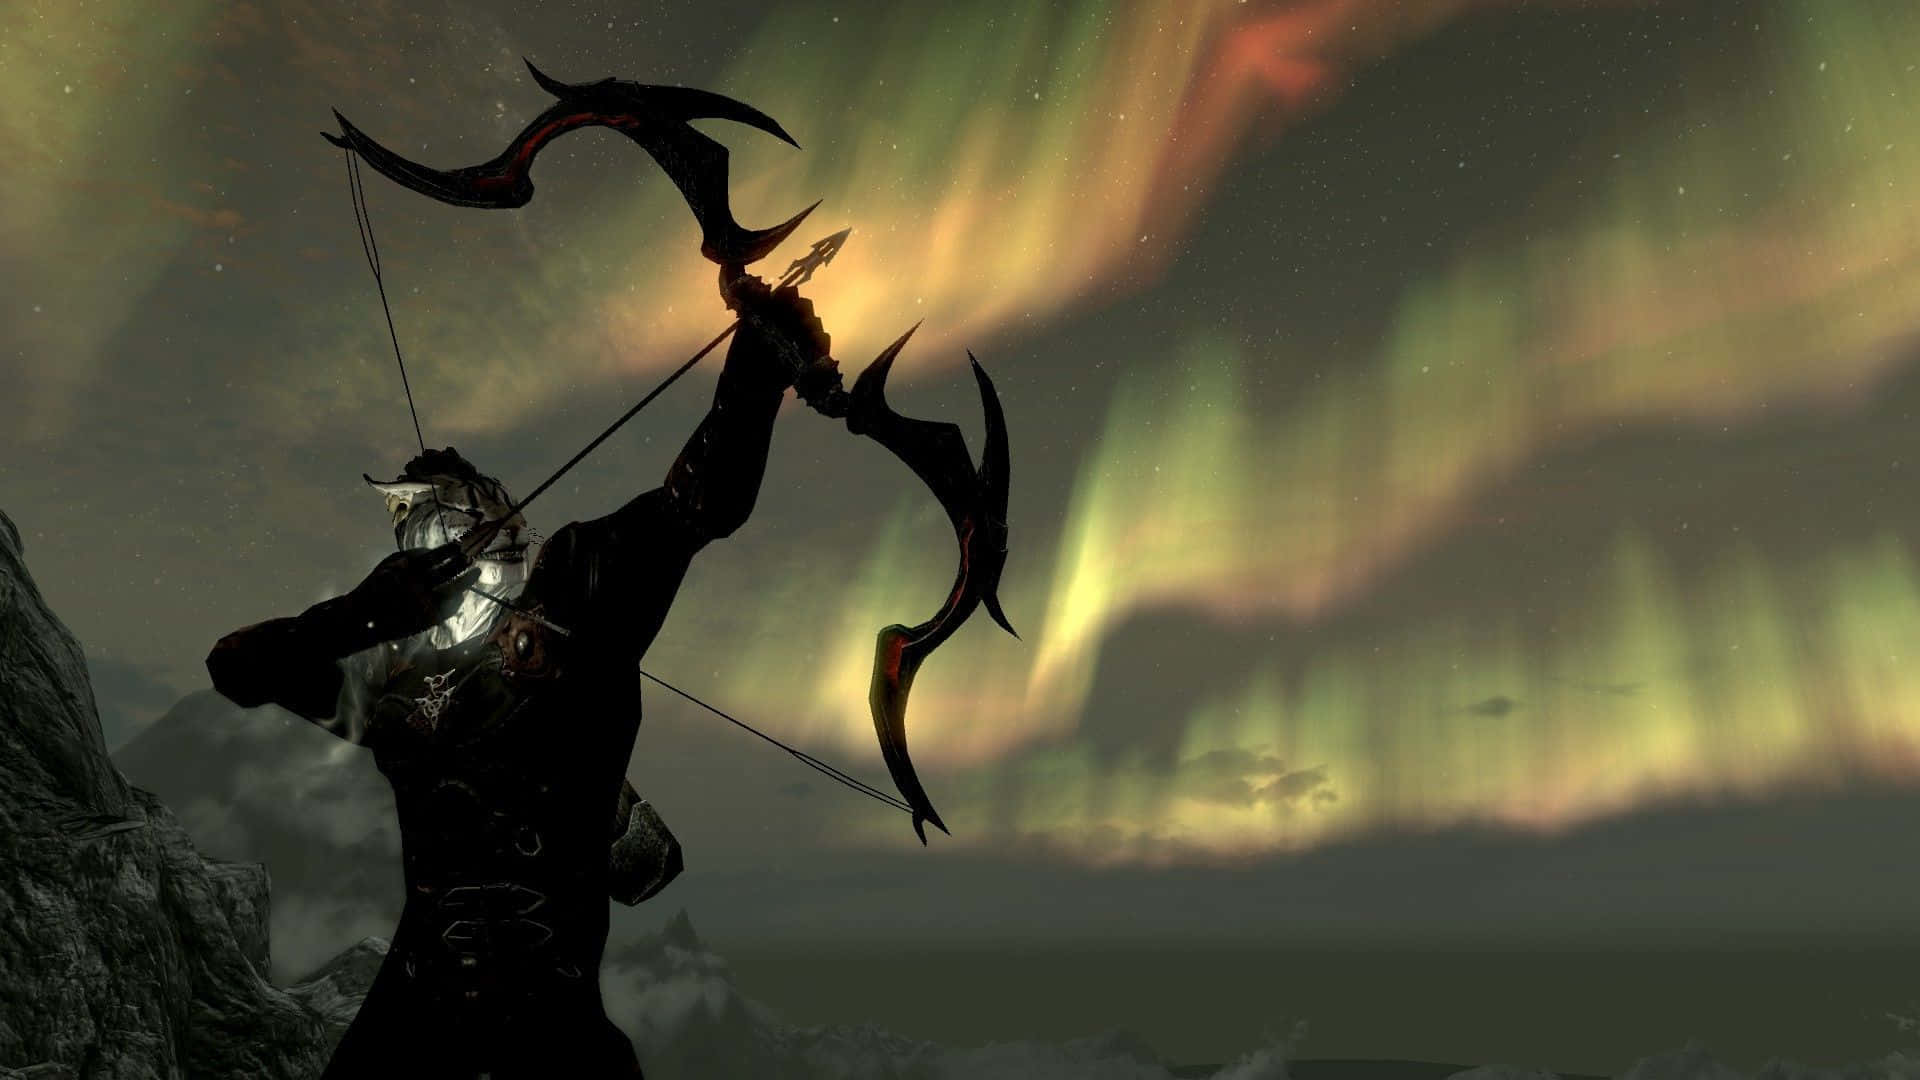 A Man Is Holding A Bow And Arrow In Front Of An Aurora